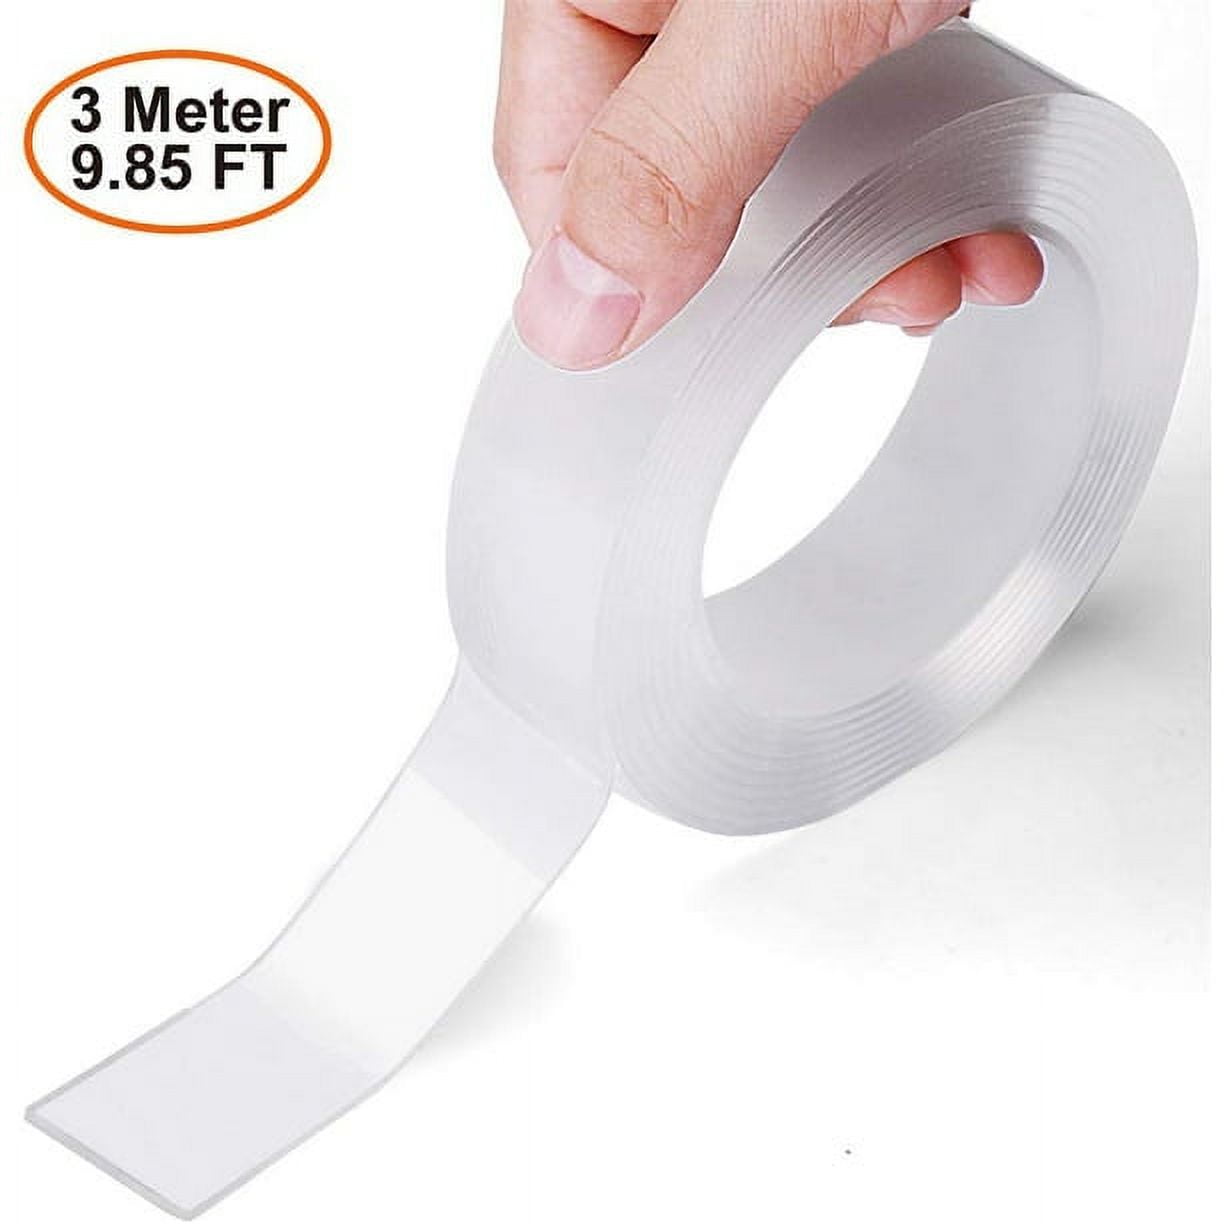 Transparent Dots Glue Removable Double Sided Tape Adhesive - Temu